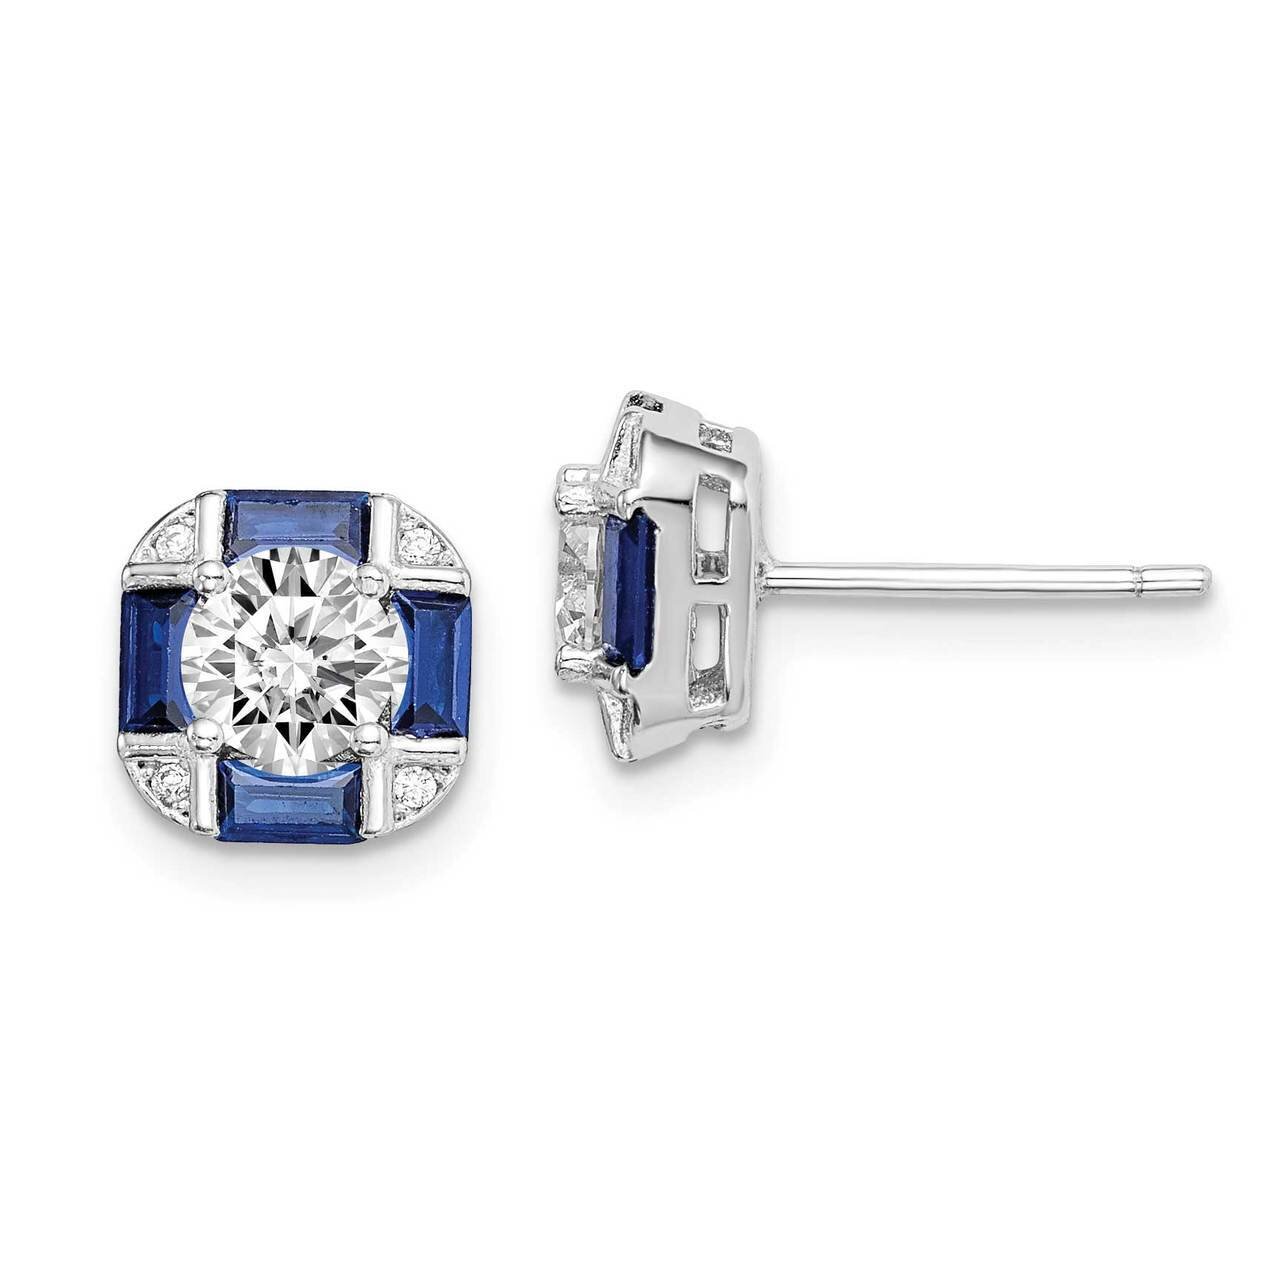 Lab Createad Blue Spinel Earrings Sterling Silver Rhodium-plated CZ Diamond QE15241